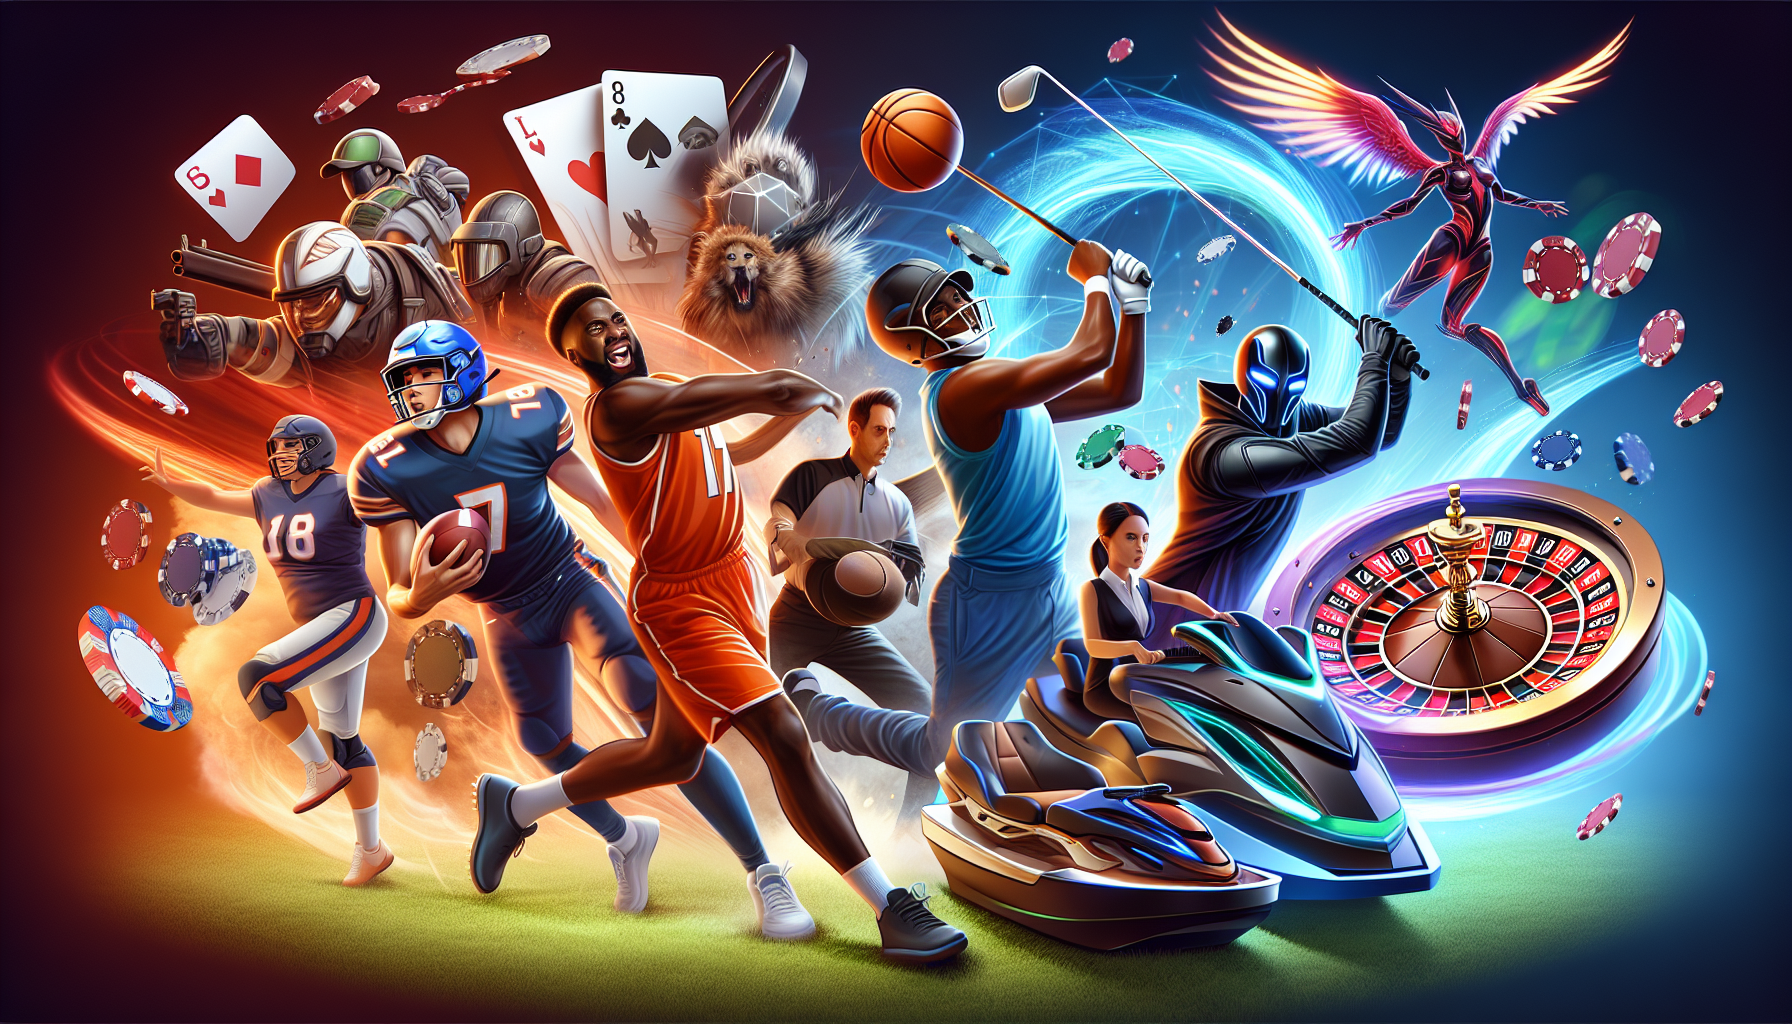 Illustration of diverse betting and gaming options